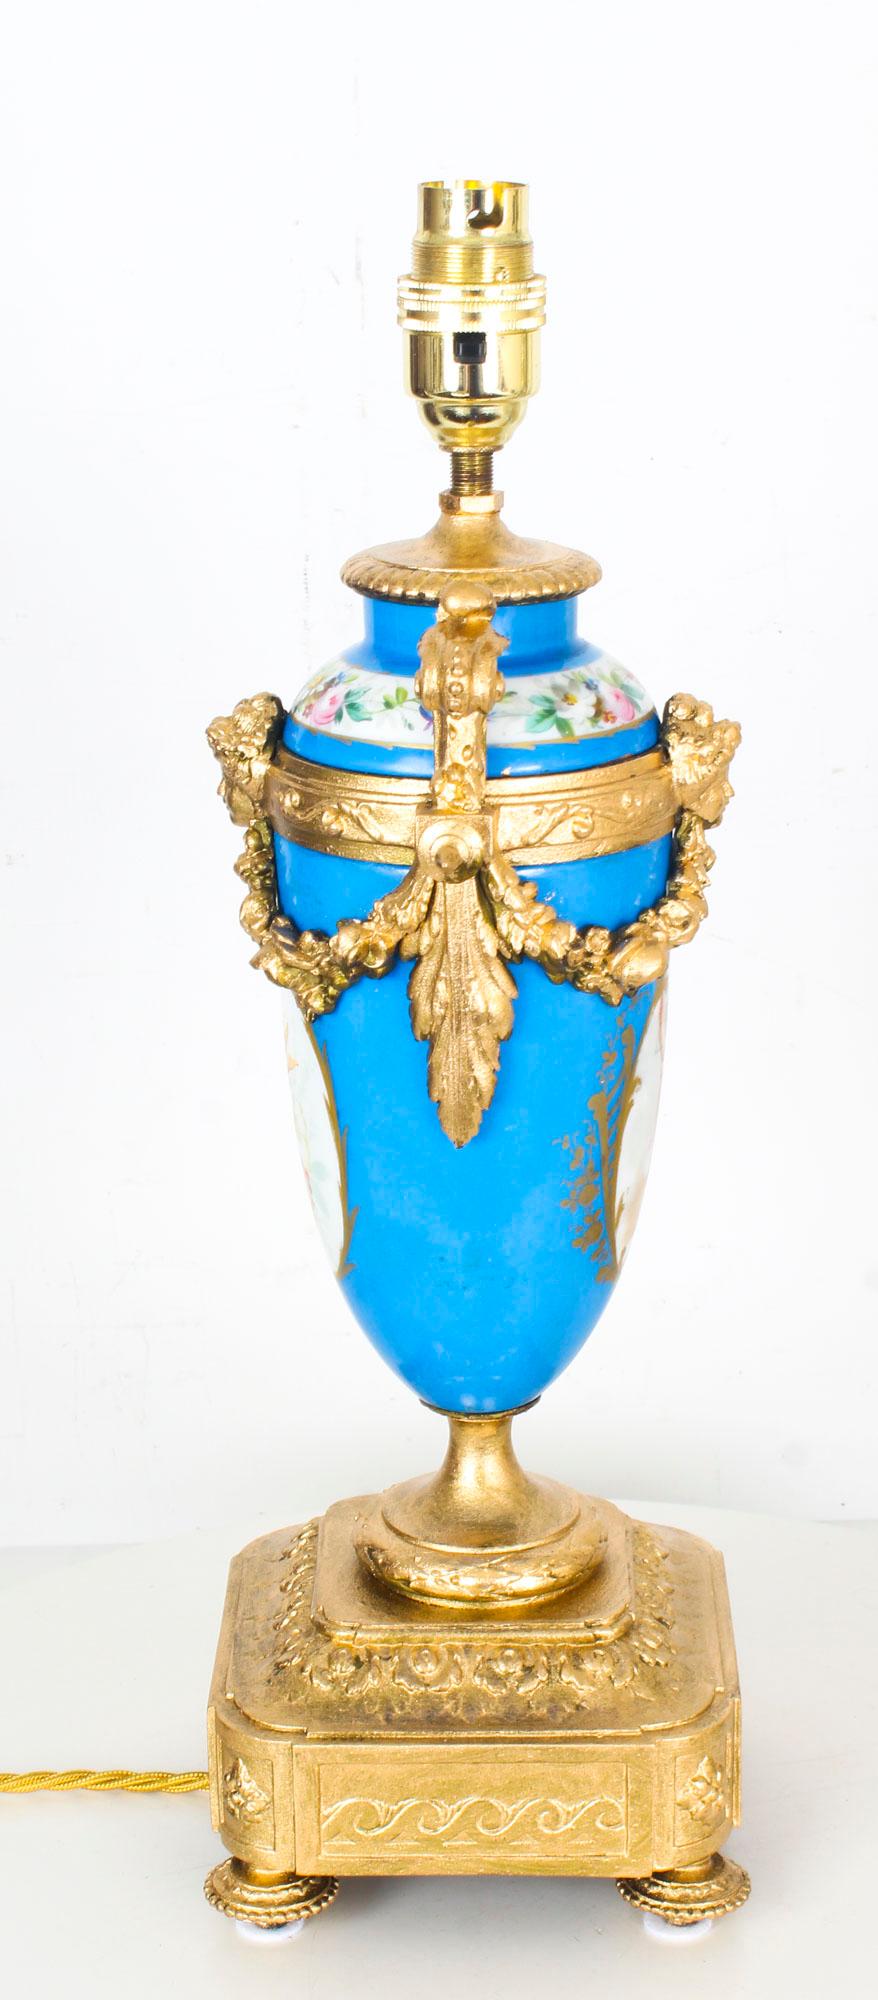 Late 18th Century Antique Pair of Large French Bleu Celeste Sevres Vases Lamps 19th Century